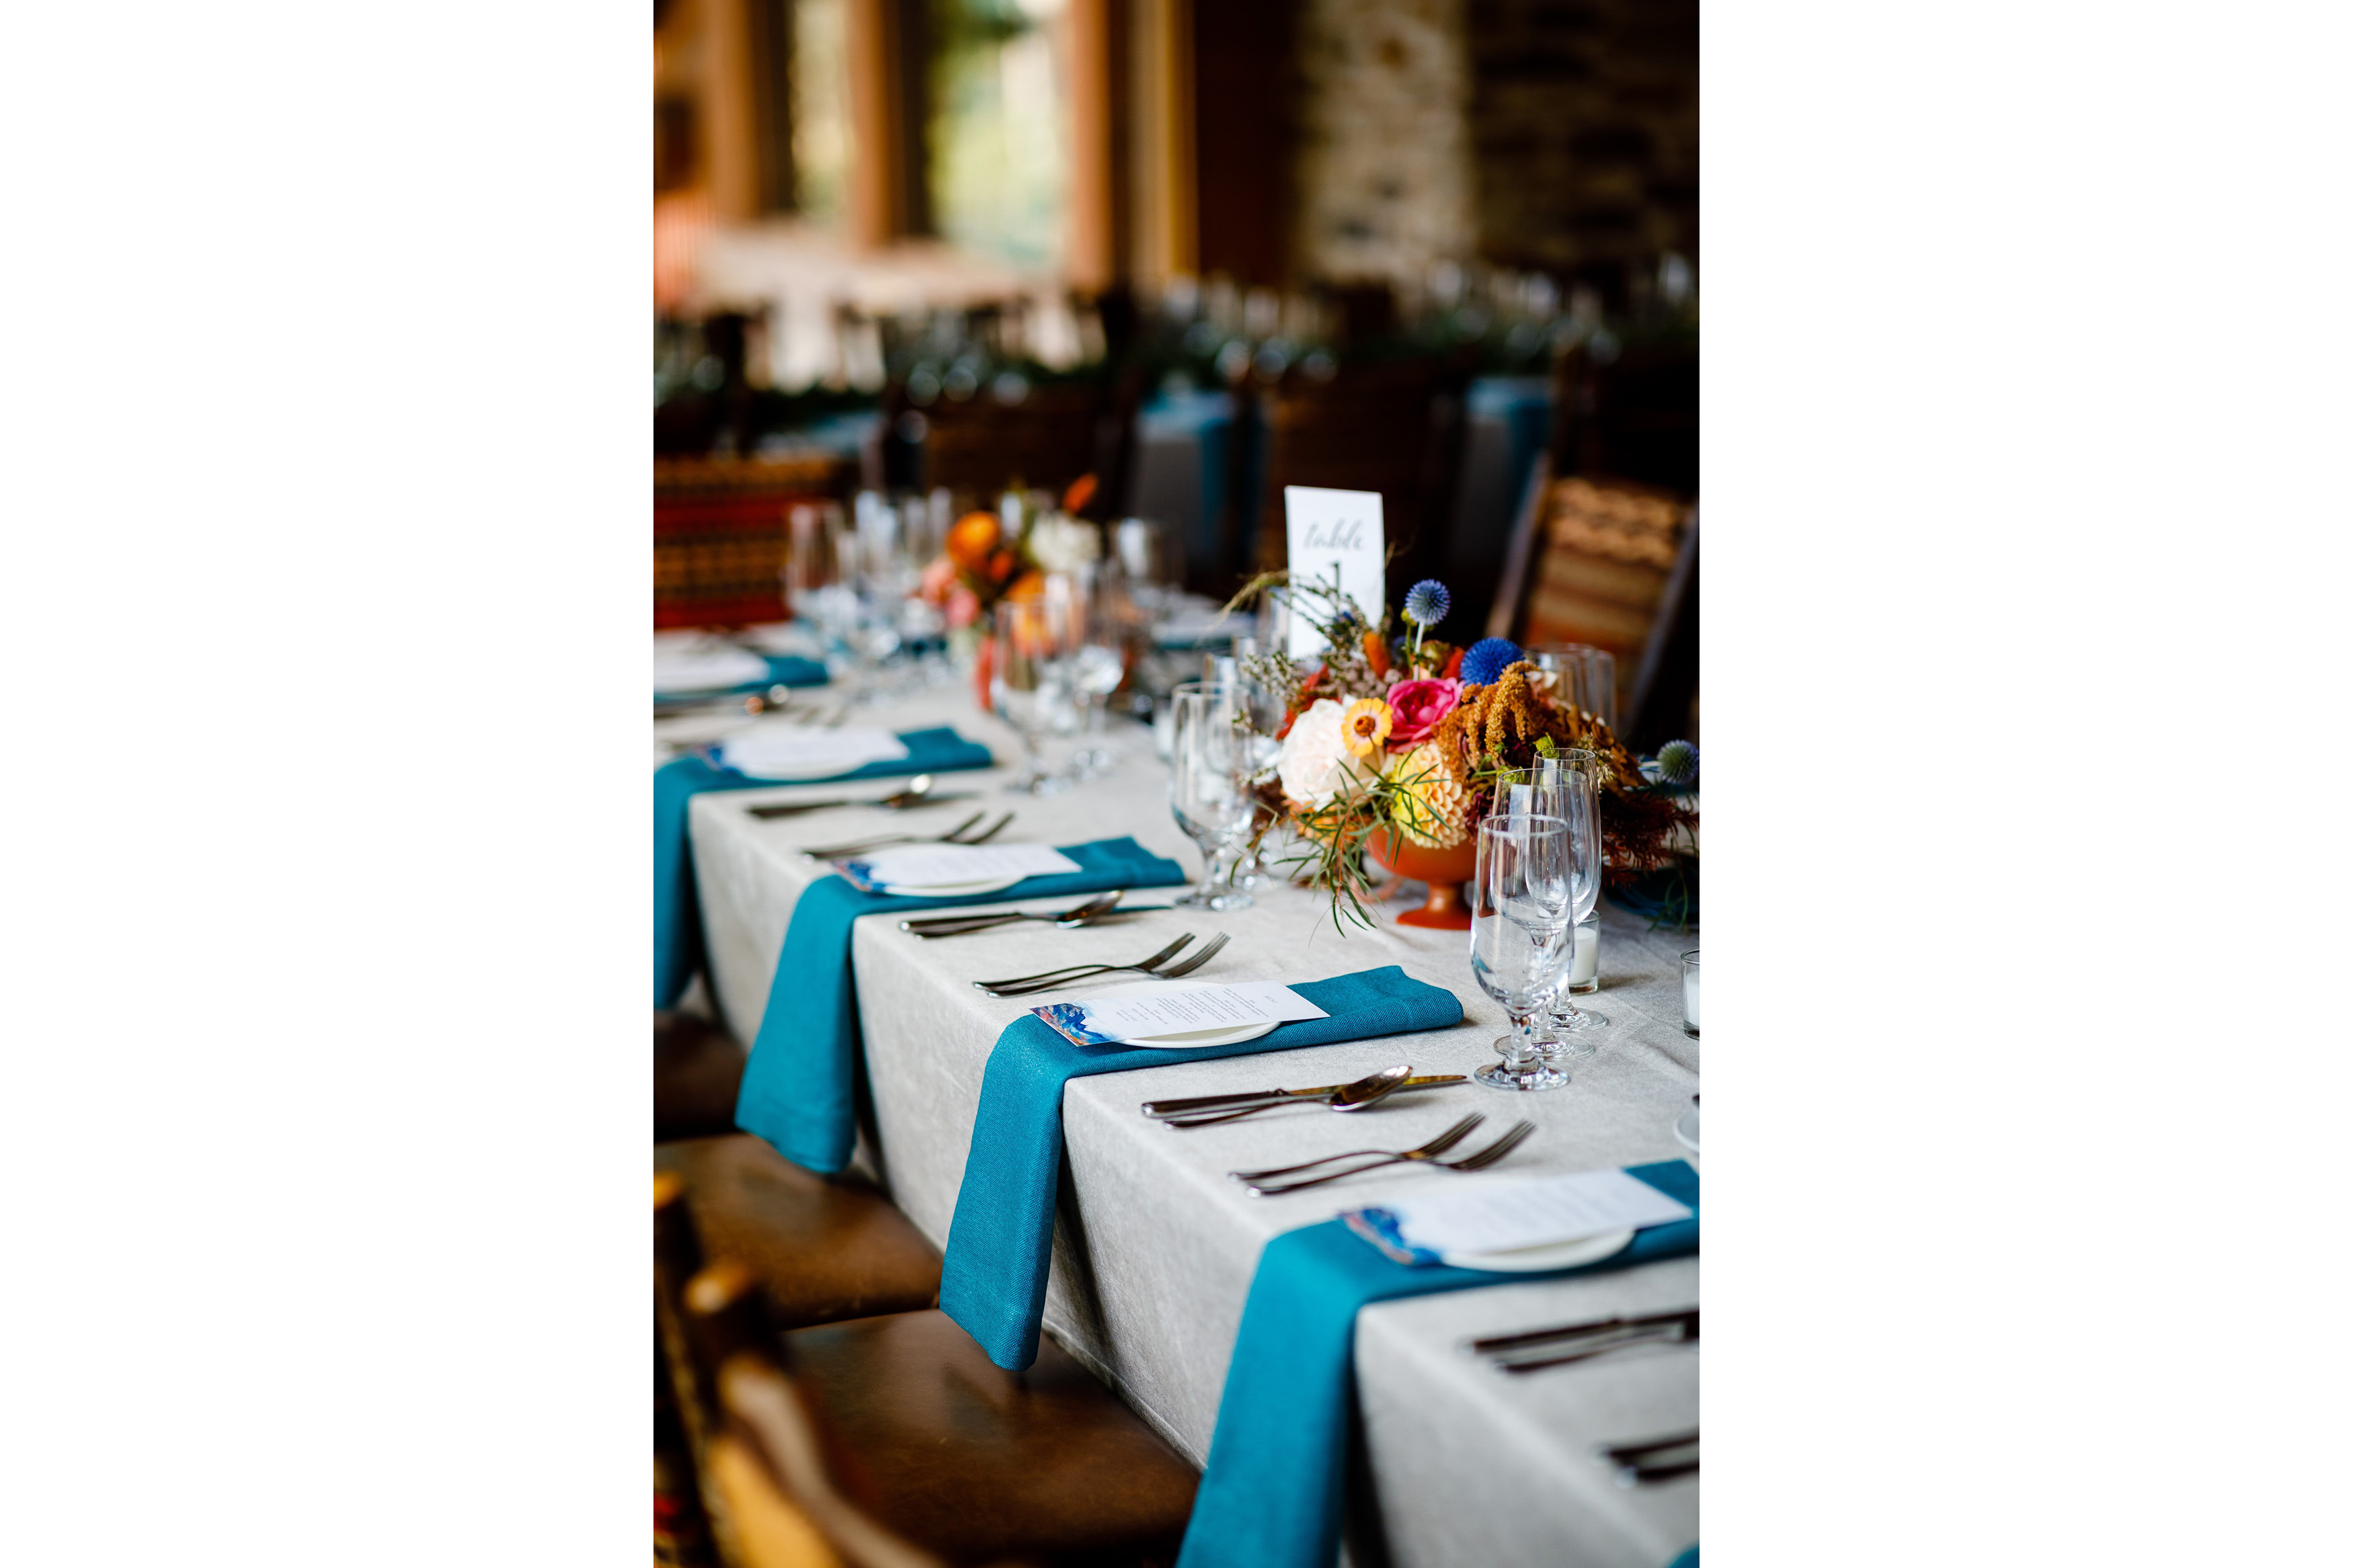 Reception décor, plates, flowers and menus for an Allred's wedding reception.